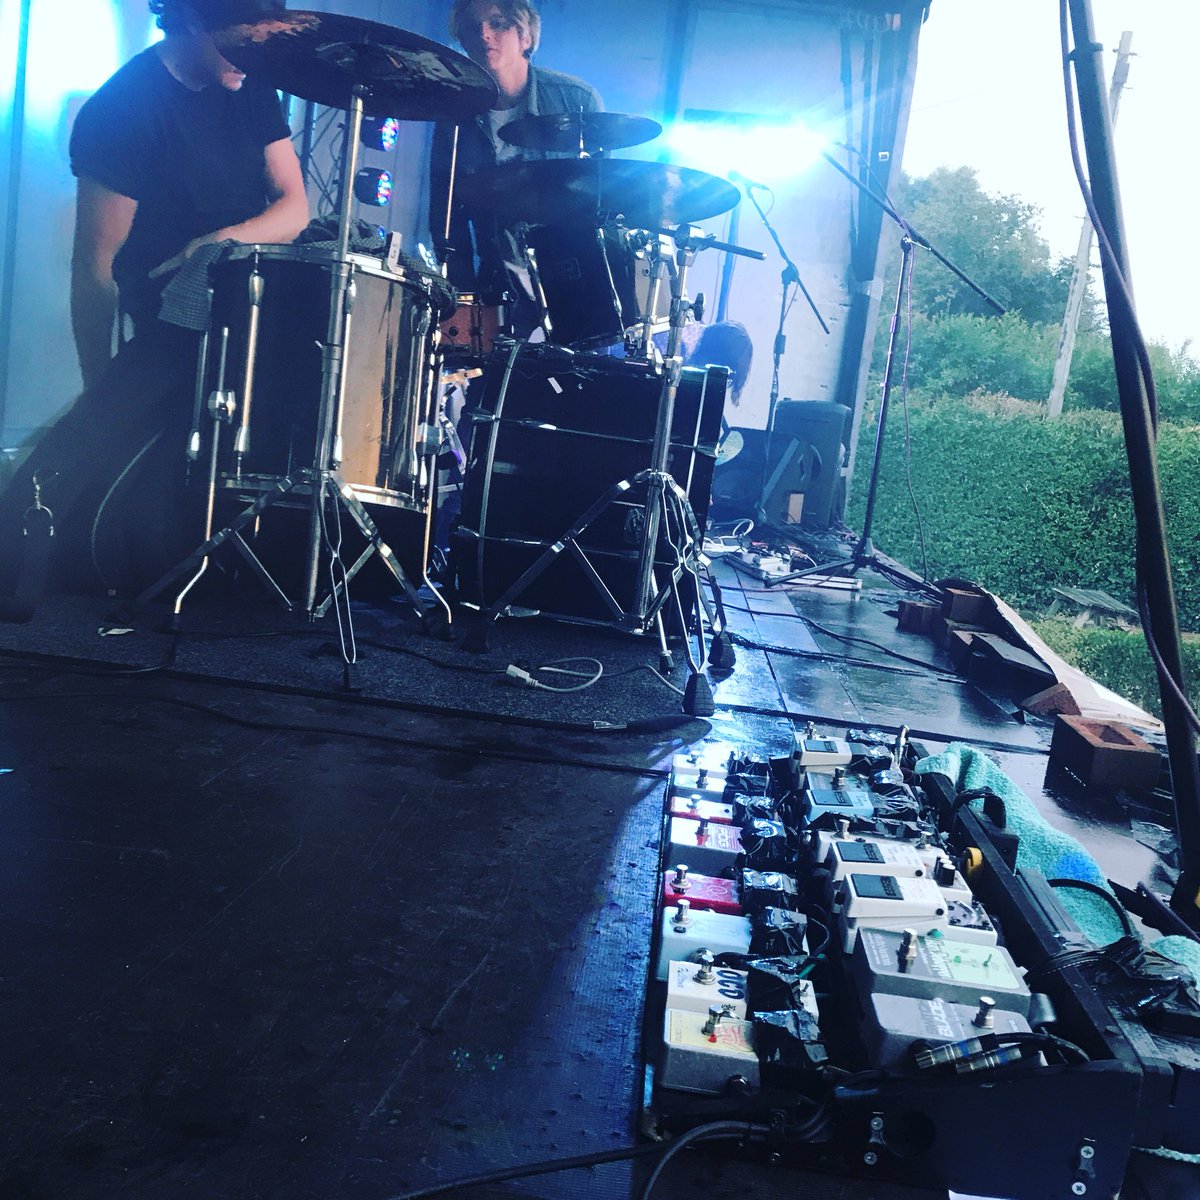 Thanks to Heather Music Festival. We had a blast on this trailer last night! 
#thosehowlinsounds #ths #nottsmusic #nottinghammusic #nottinghammusicscene #ilkeston  #newmusic #heathermusicfestival #heathermusicfest #heather #coalville #jhs #fulltone #boss #ehx #tcelectronic